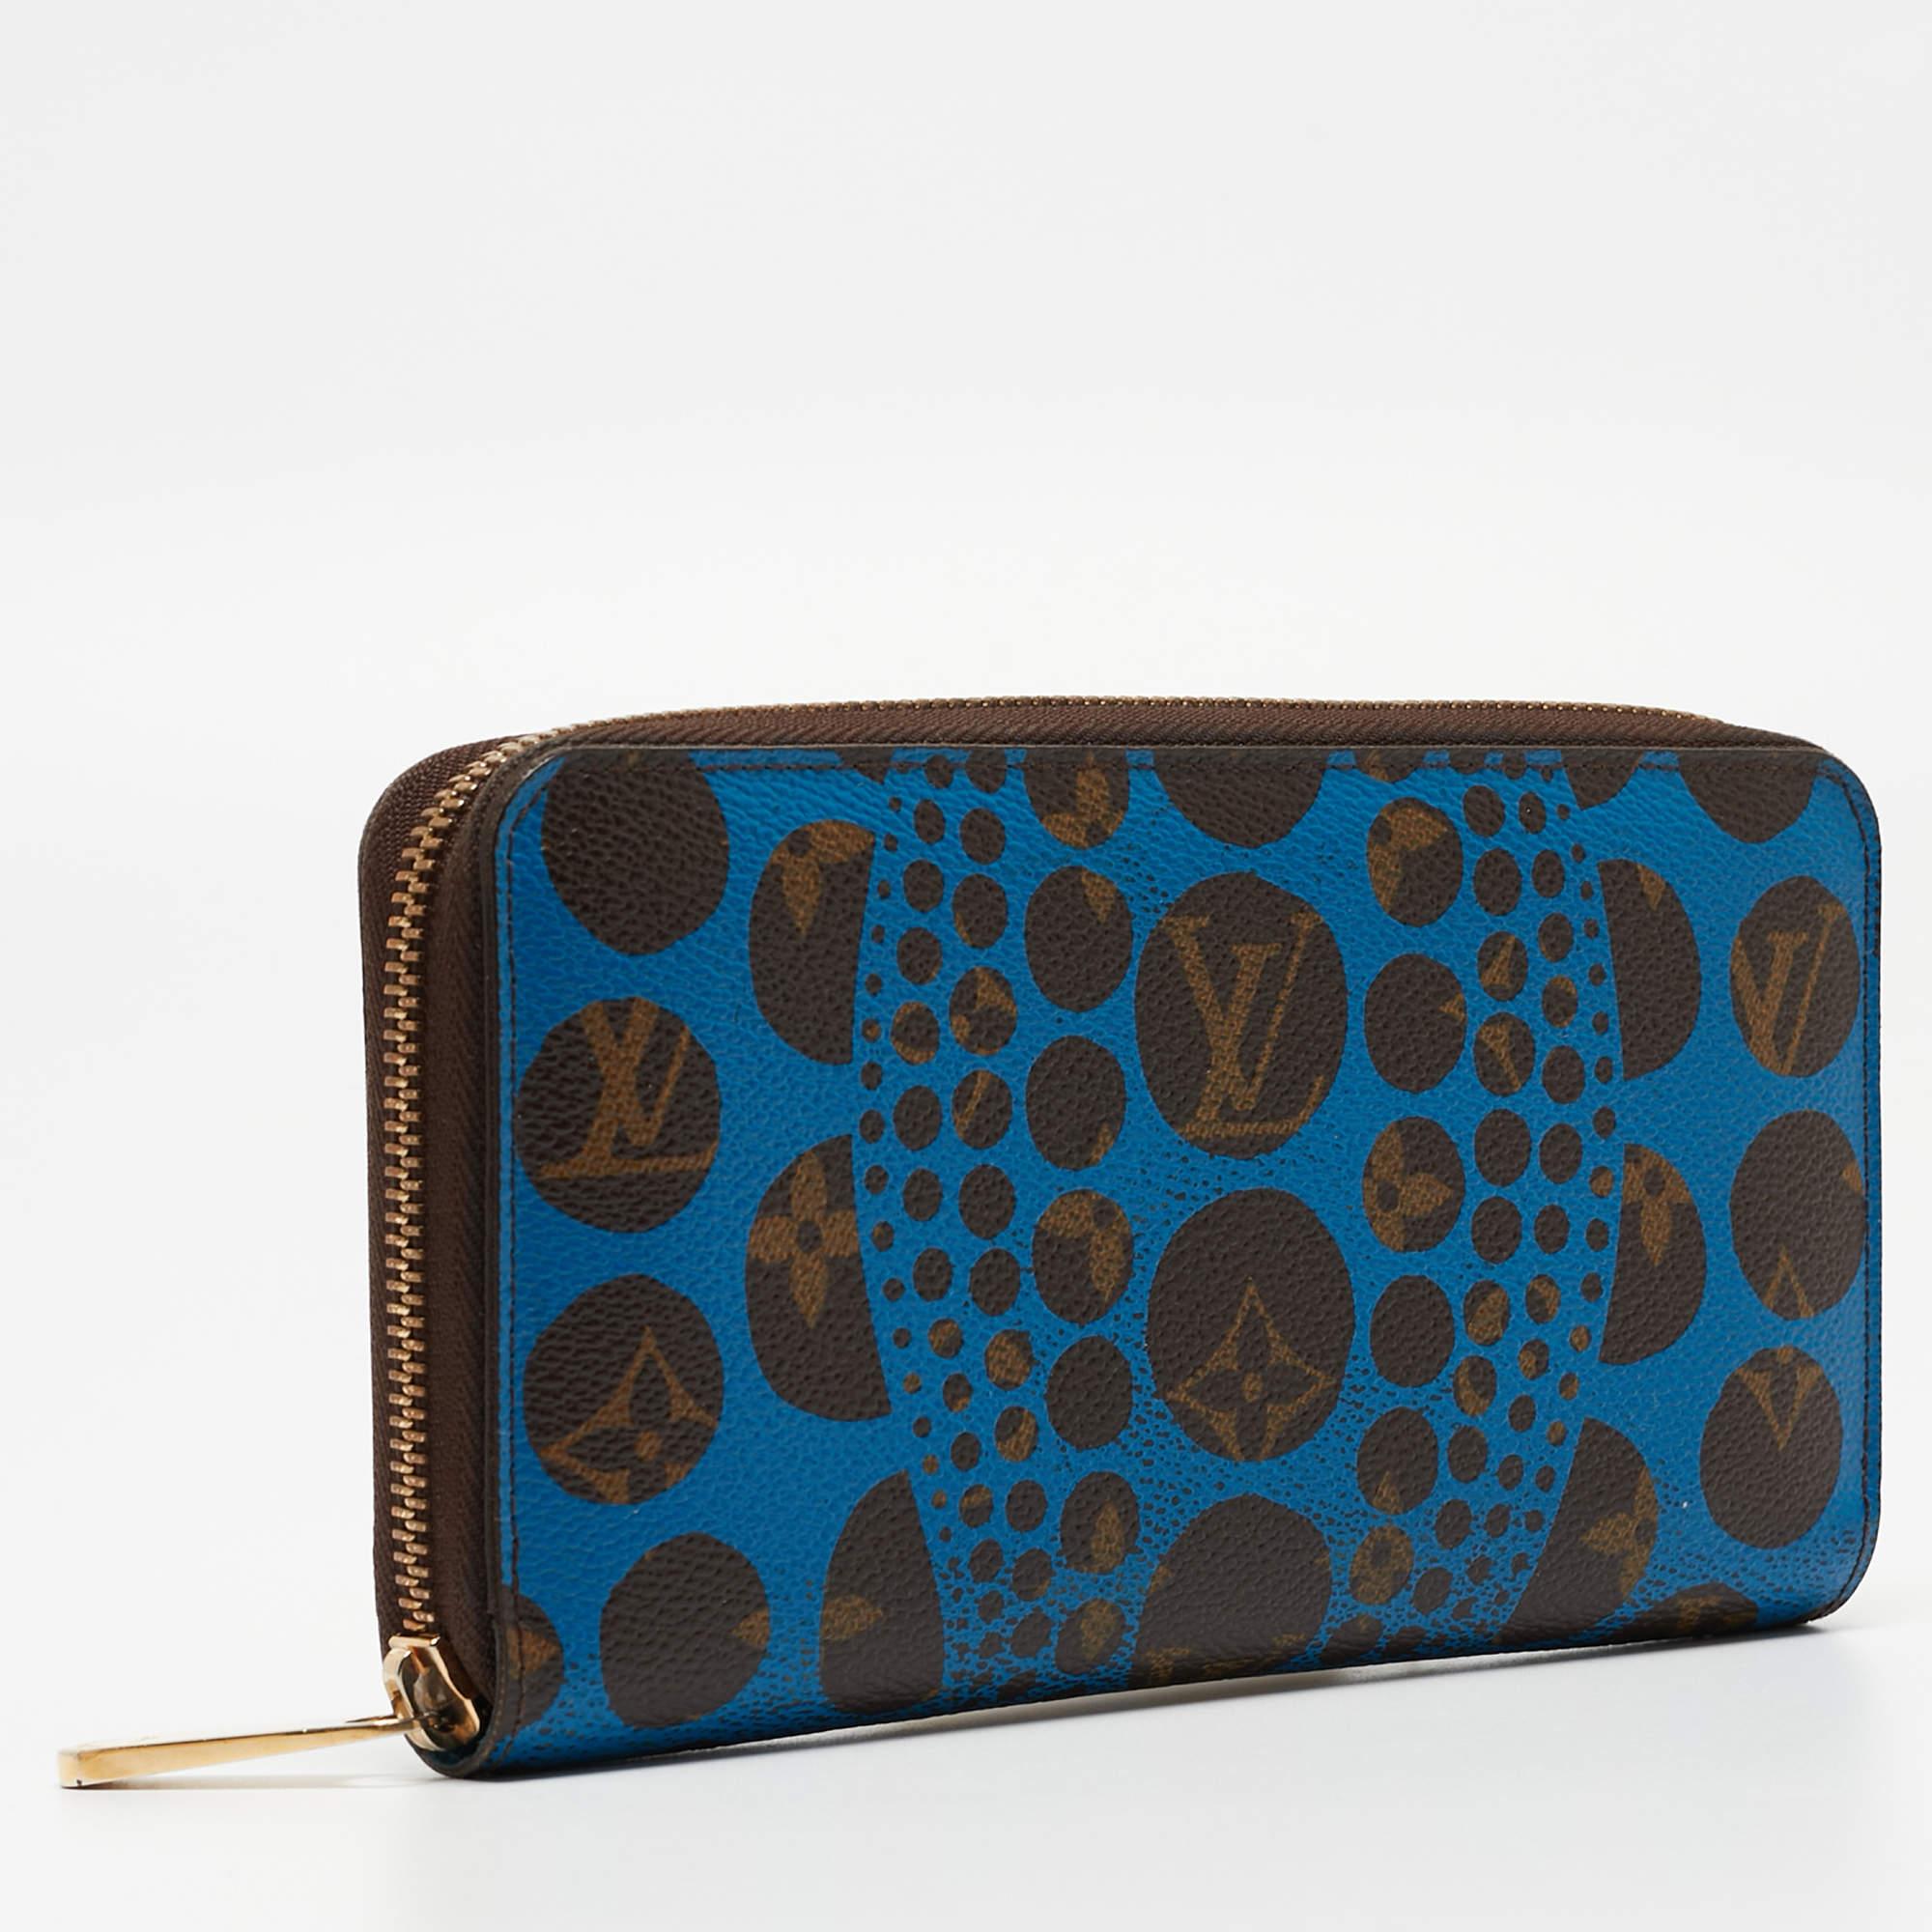 This wallet from Louis Vuitton is a limited edition design from the collection created with Yayoi Kusama. The pair is crafted using Monogram canvas and adorned with Kusama's signature bold spots all over.

Includes: Original Dustbag, Original Box,